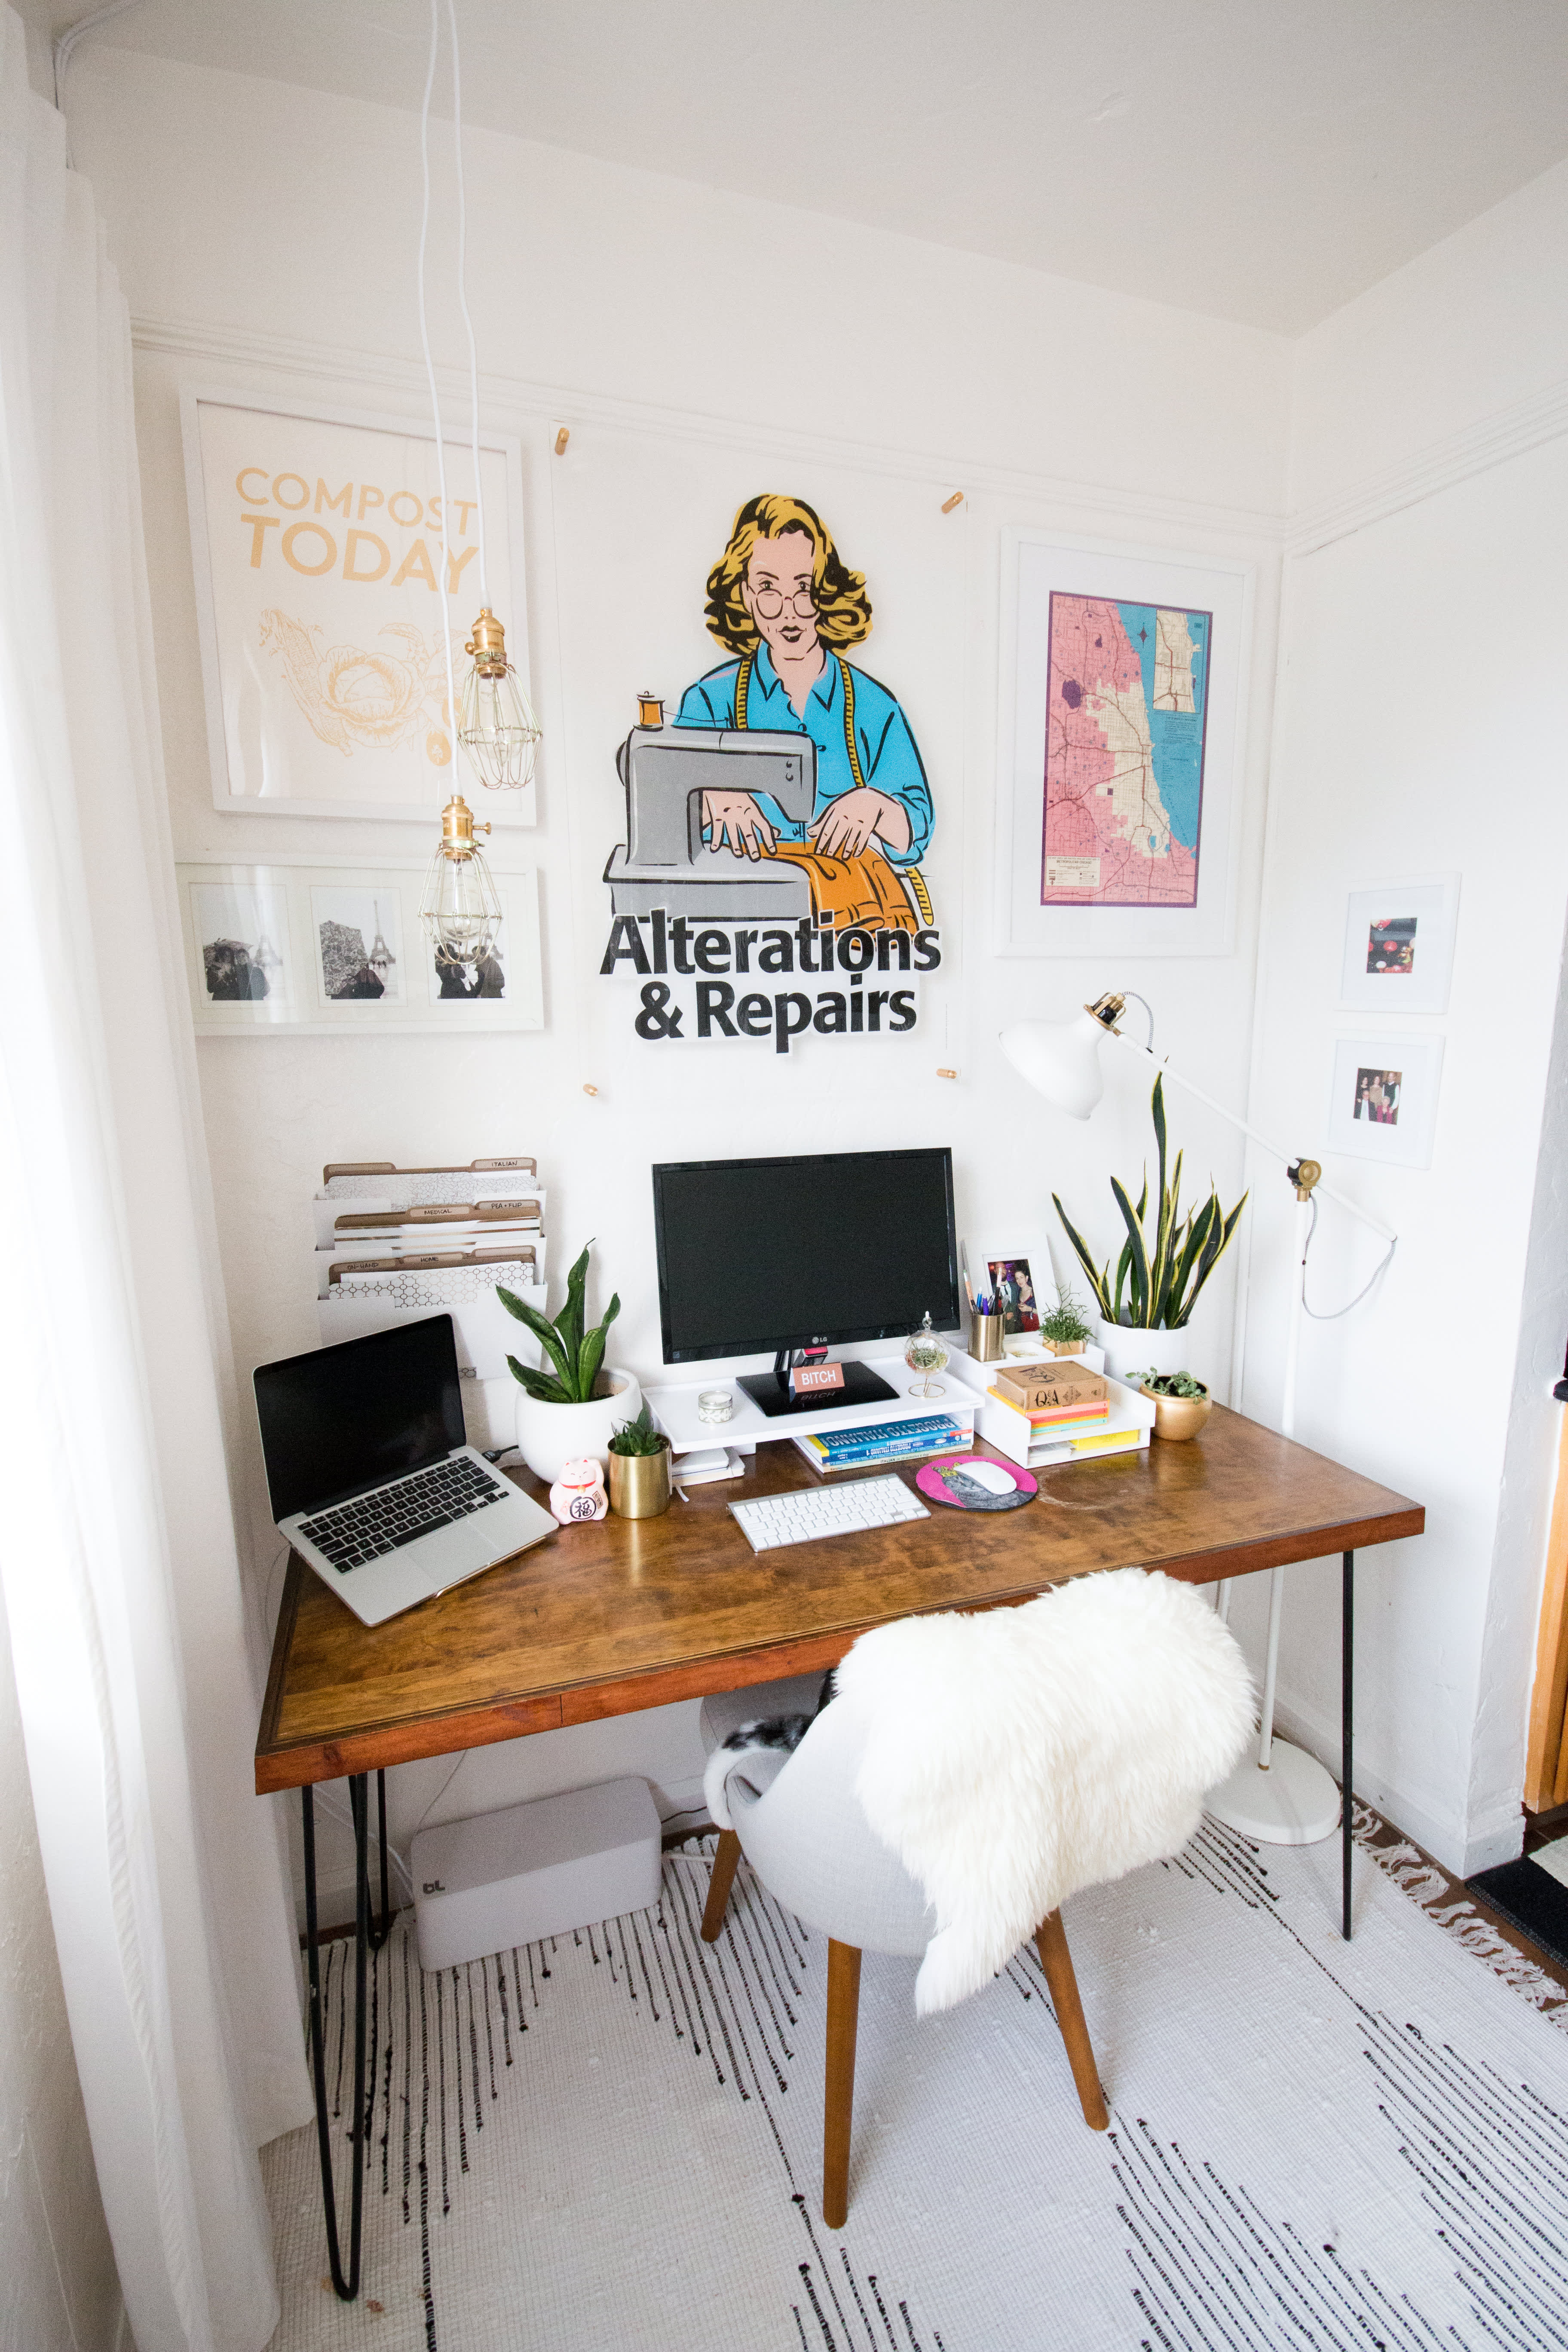 WFH? We asked our team about their most effective home office setup